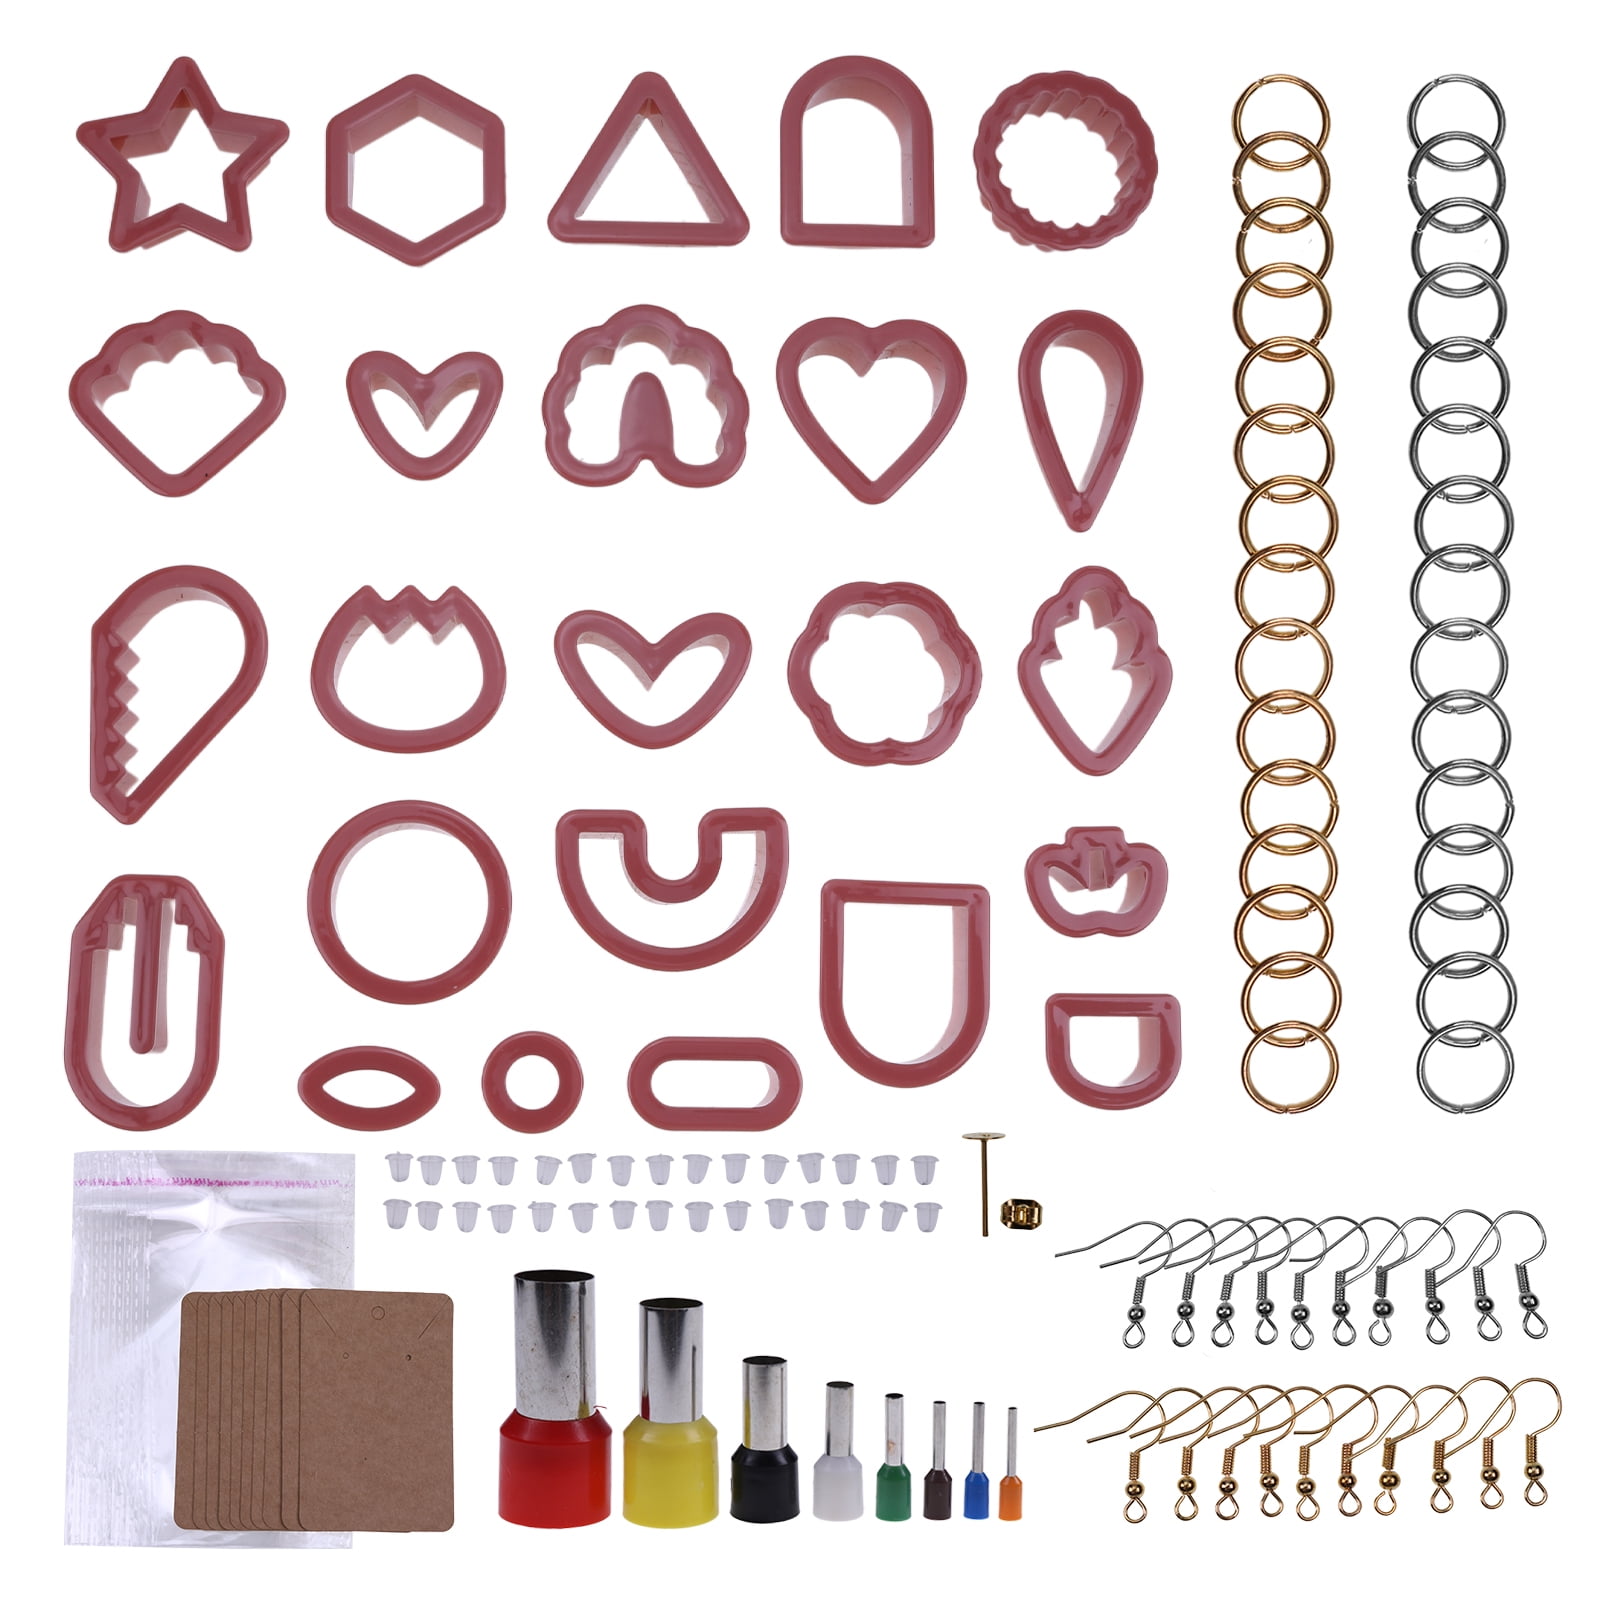 Polymer Clay Press Machine Mixers: Craft Clay Mixers Machine and 142pcs  Plastic Cutter Clay Earring, Polymer Clay Cutter Kit for Jewelry Making